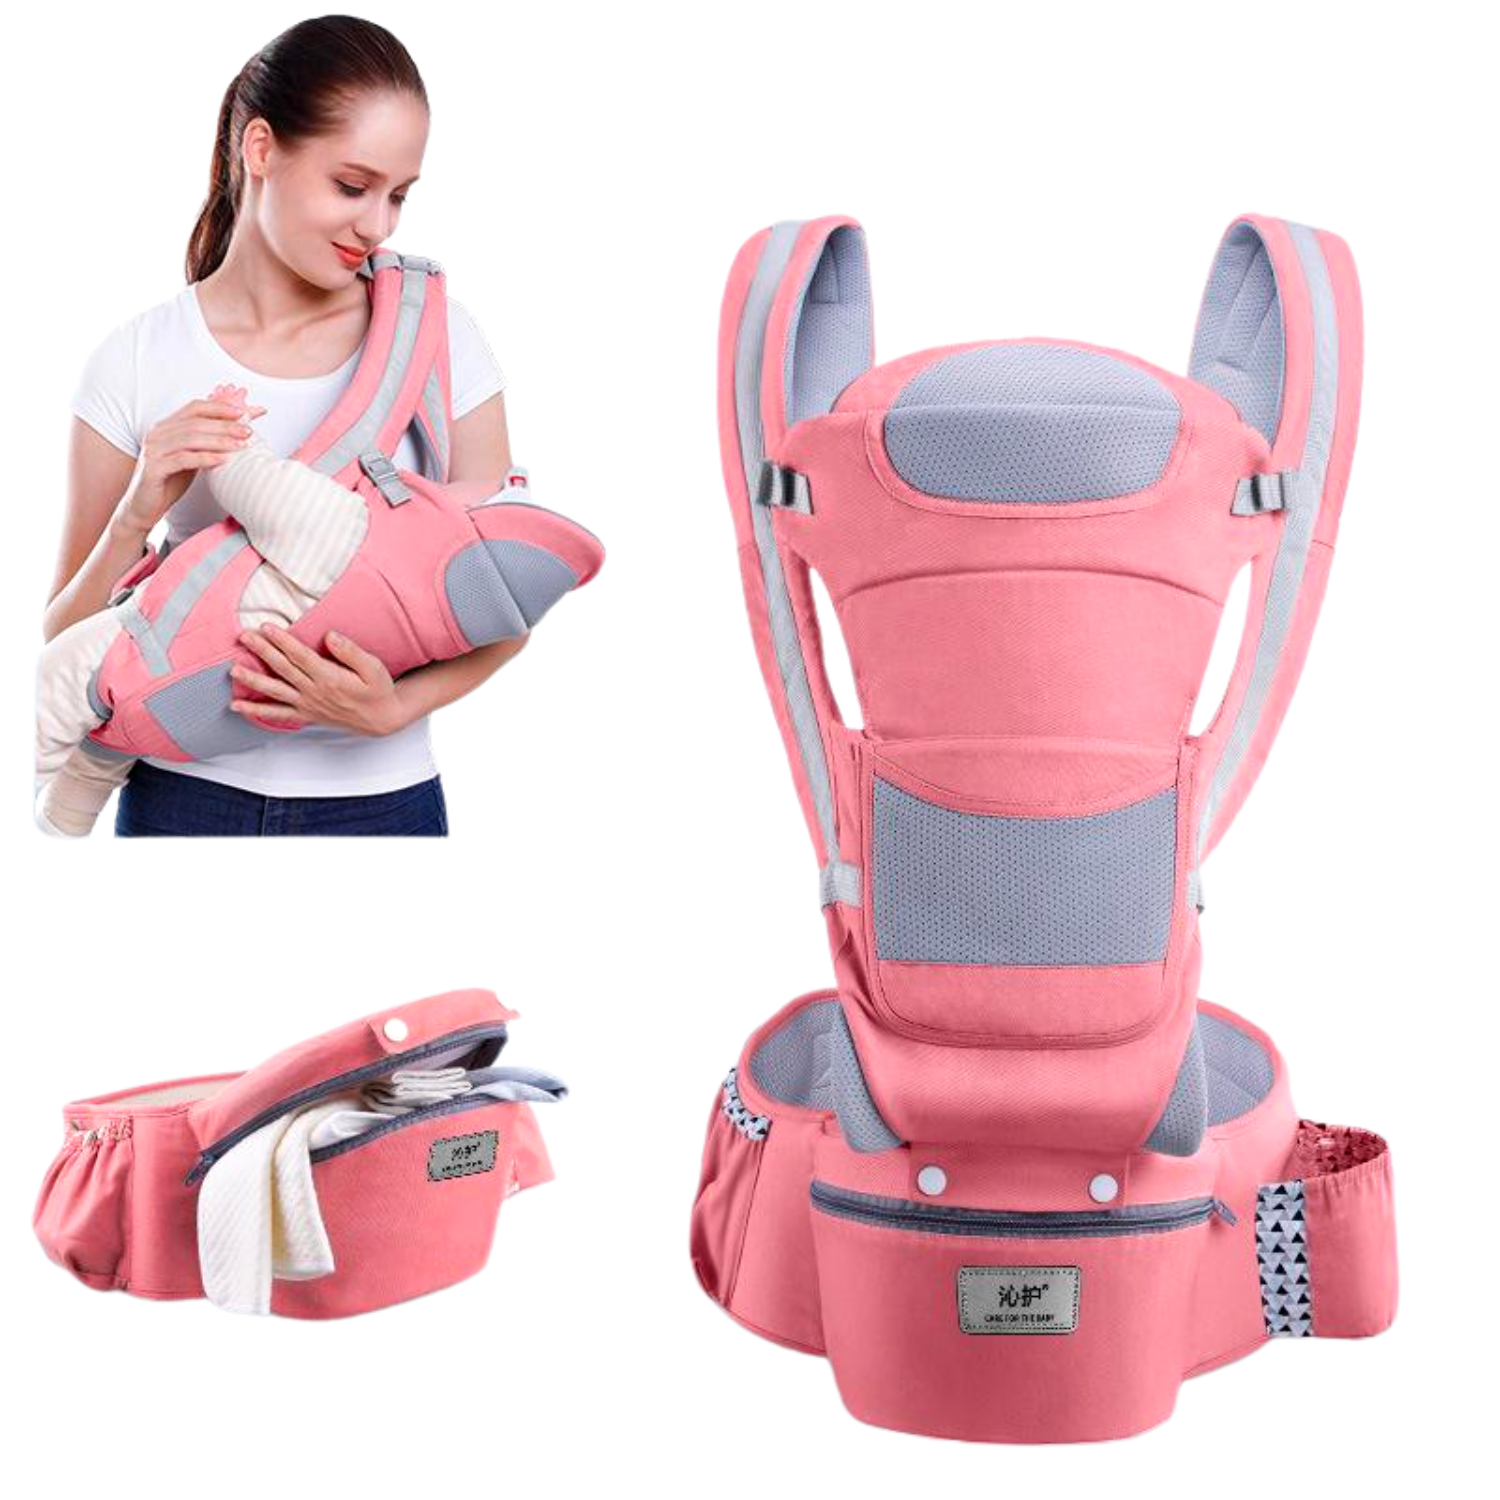 Ergonomic Baby Carrier Infant Baby Hipseat Carrier